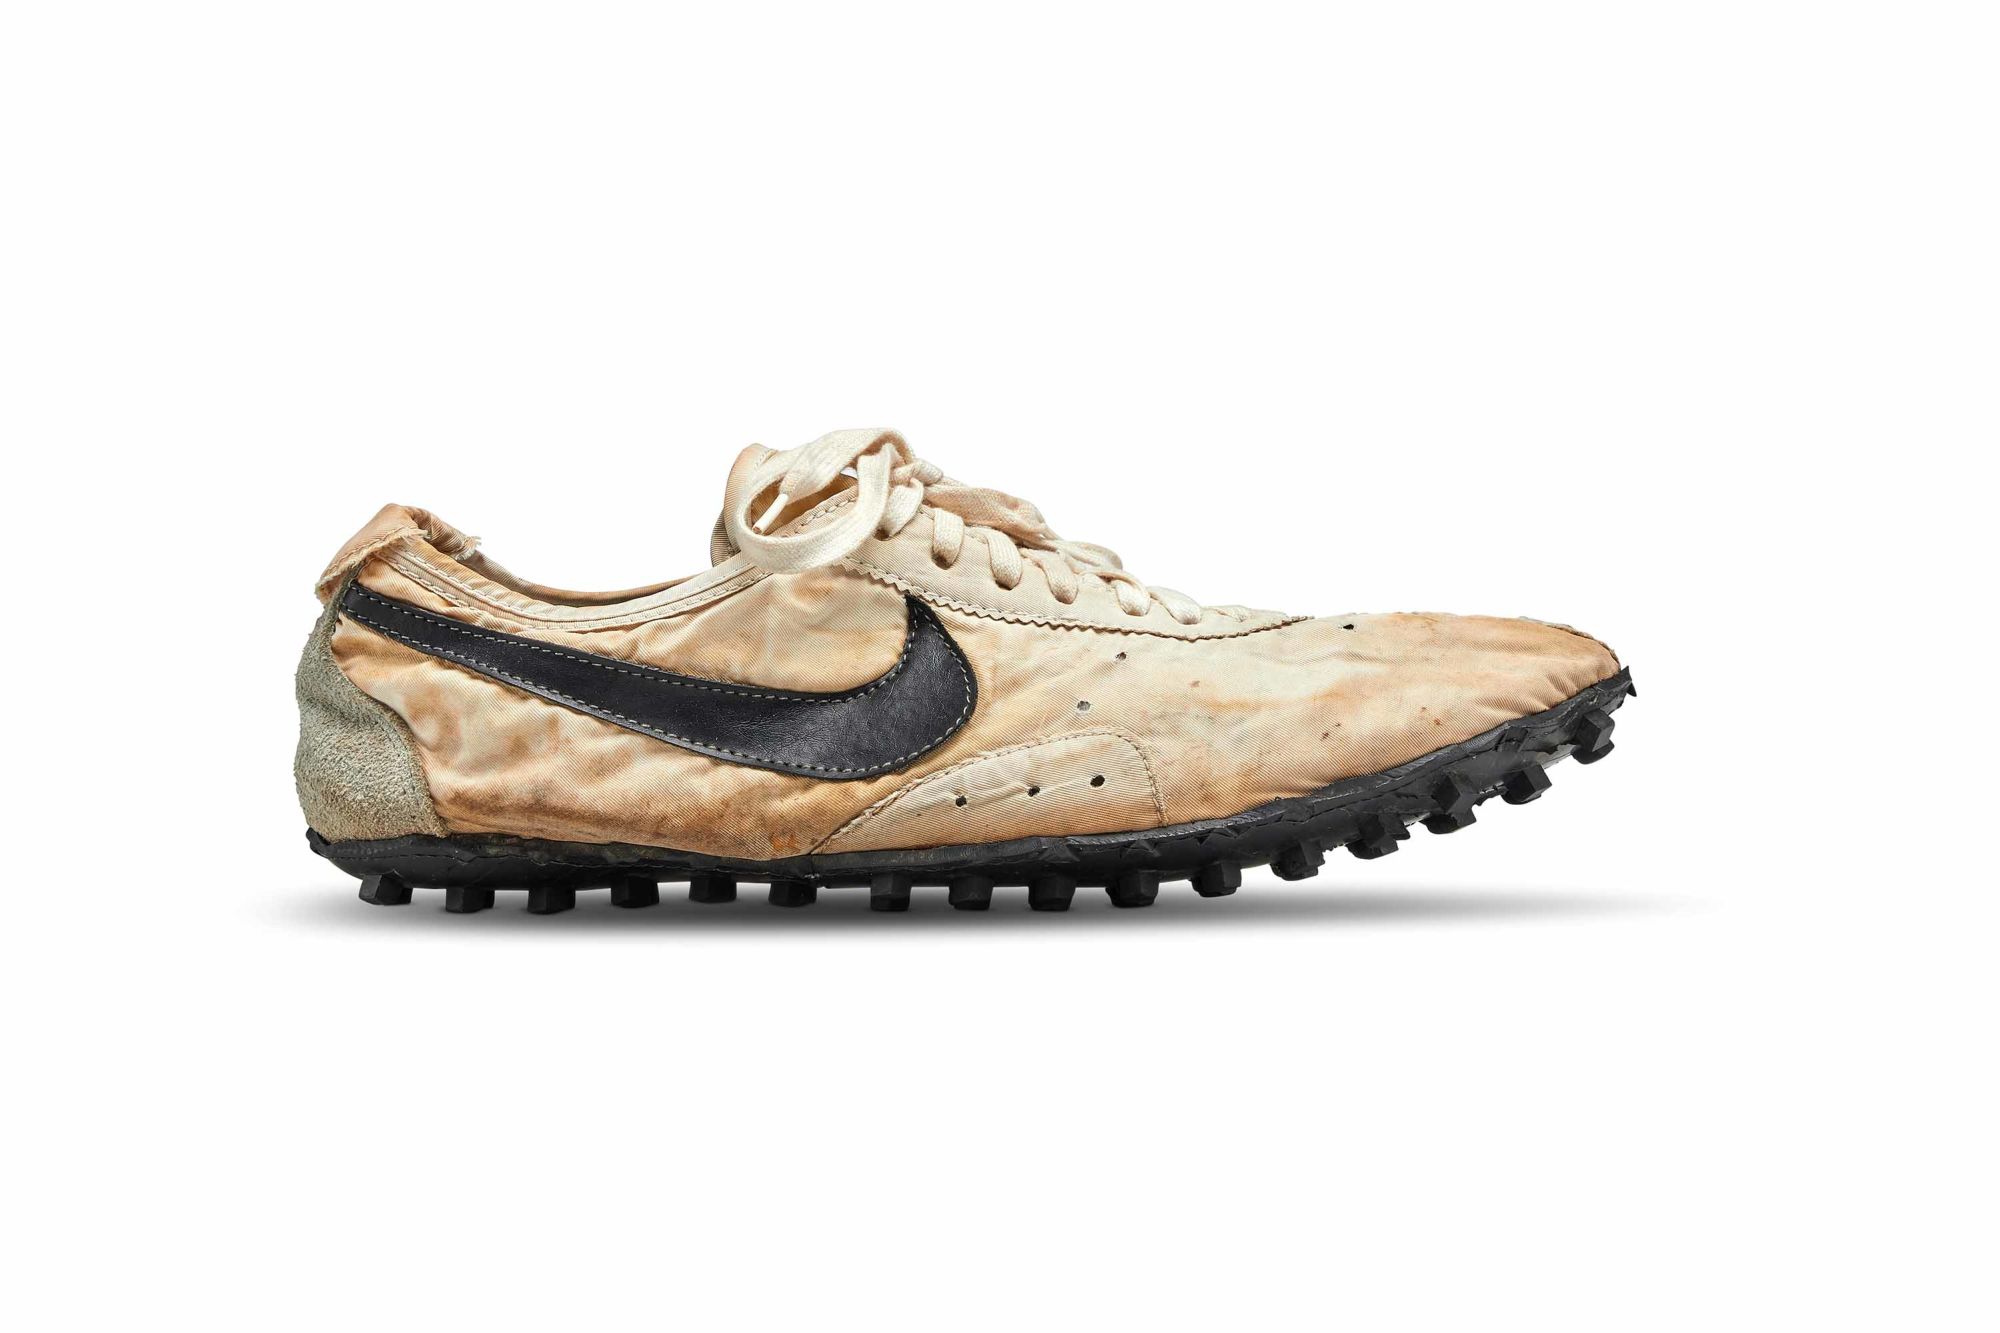 Rare Nike 'Moon Shoe' up for auction at Sotheby's could fetch $160,000